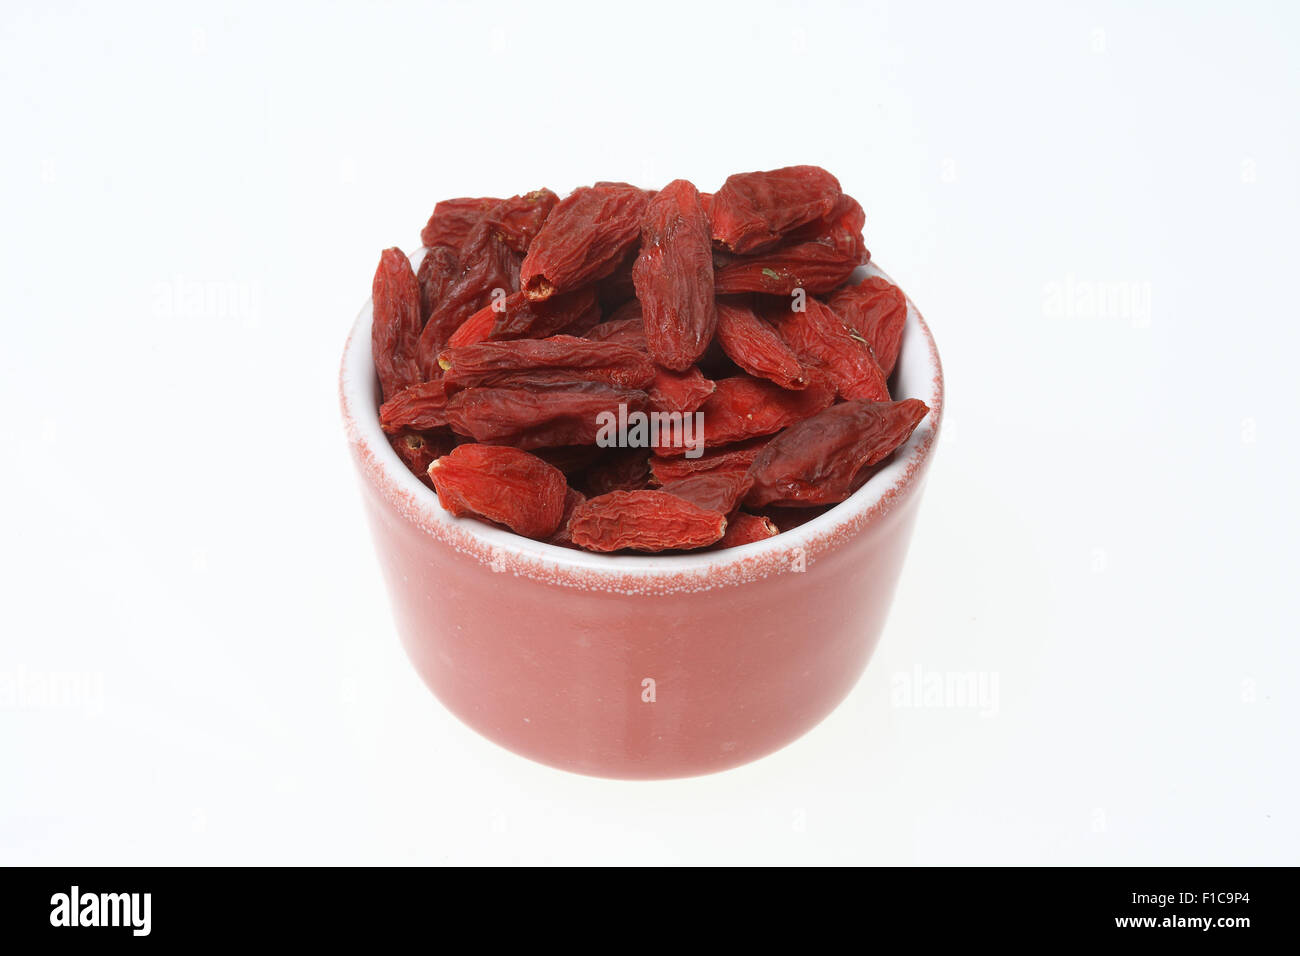 Goji berries, a fruit berry and medicinal plant Stock Photo